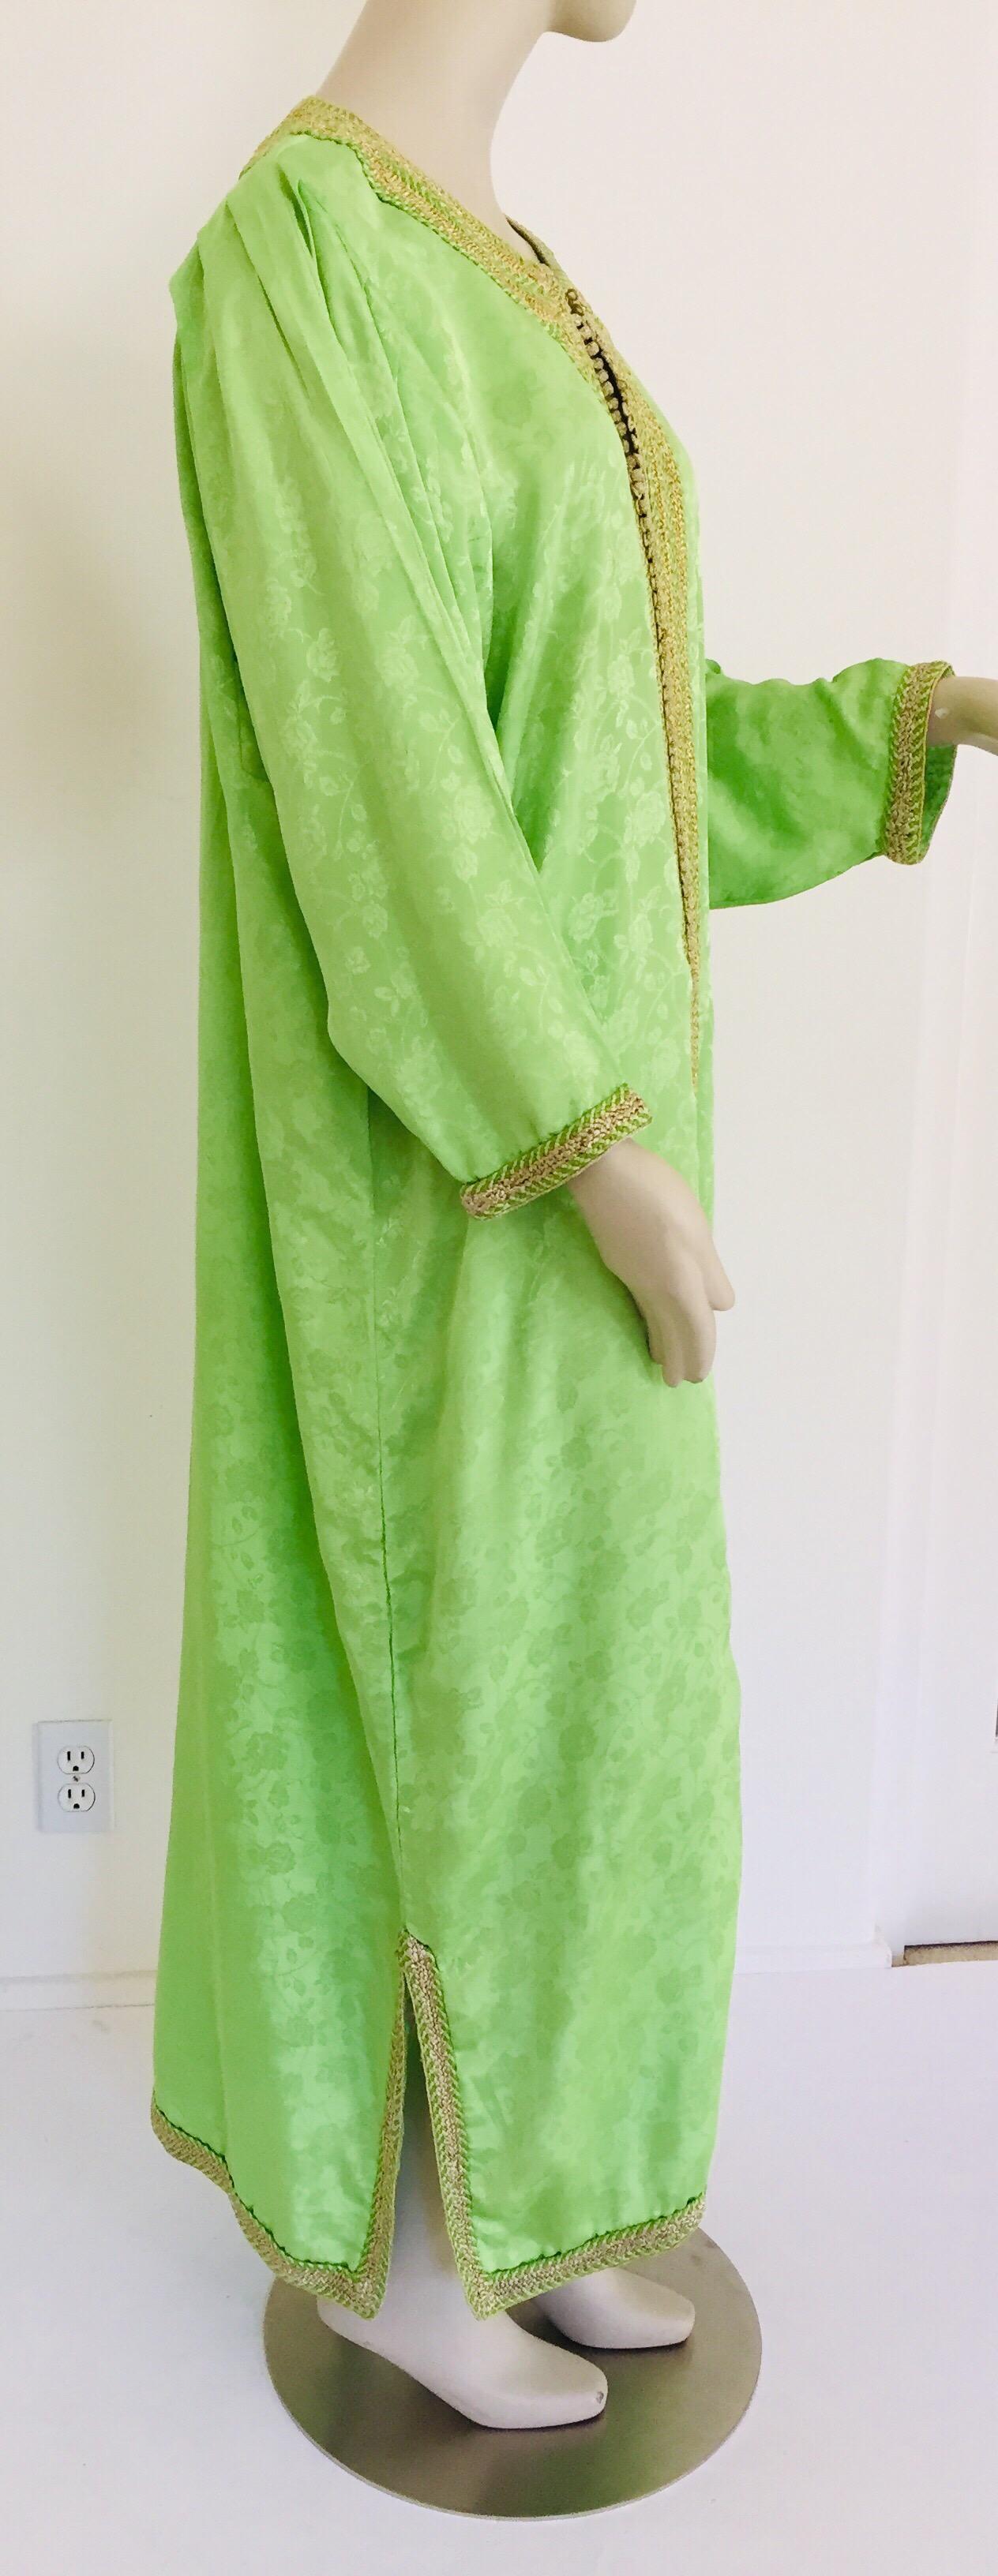 20th Century Elegant Moroccan Caftan Green and Gold Embroidered with Moorish Designs For Sale